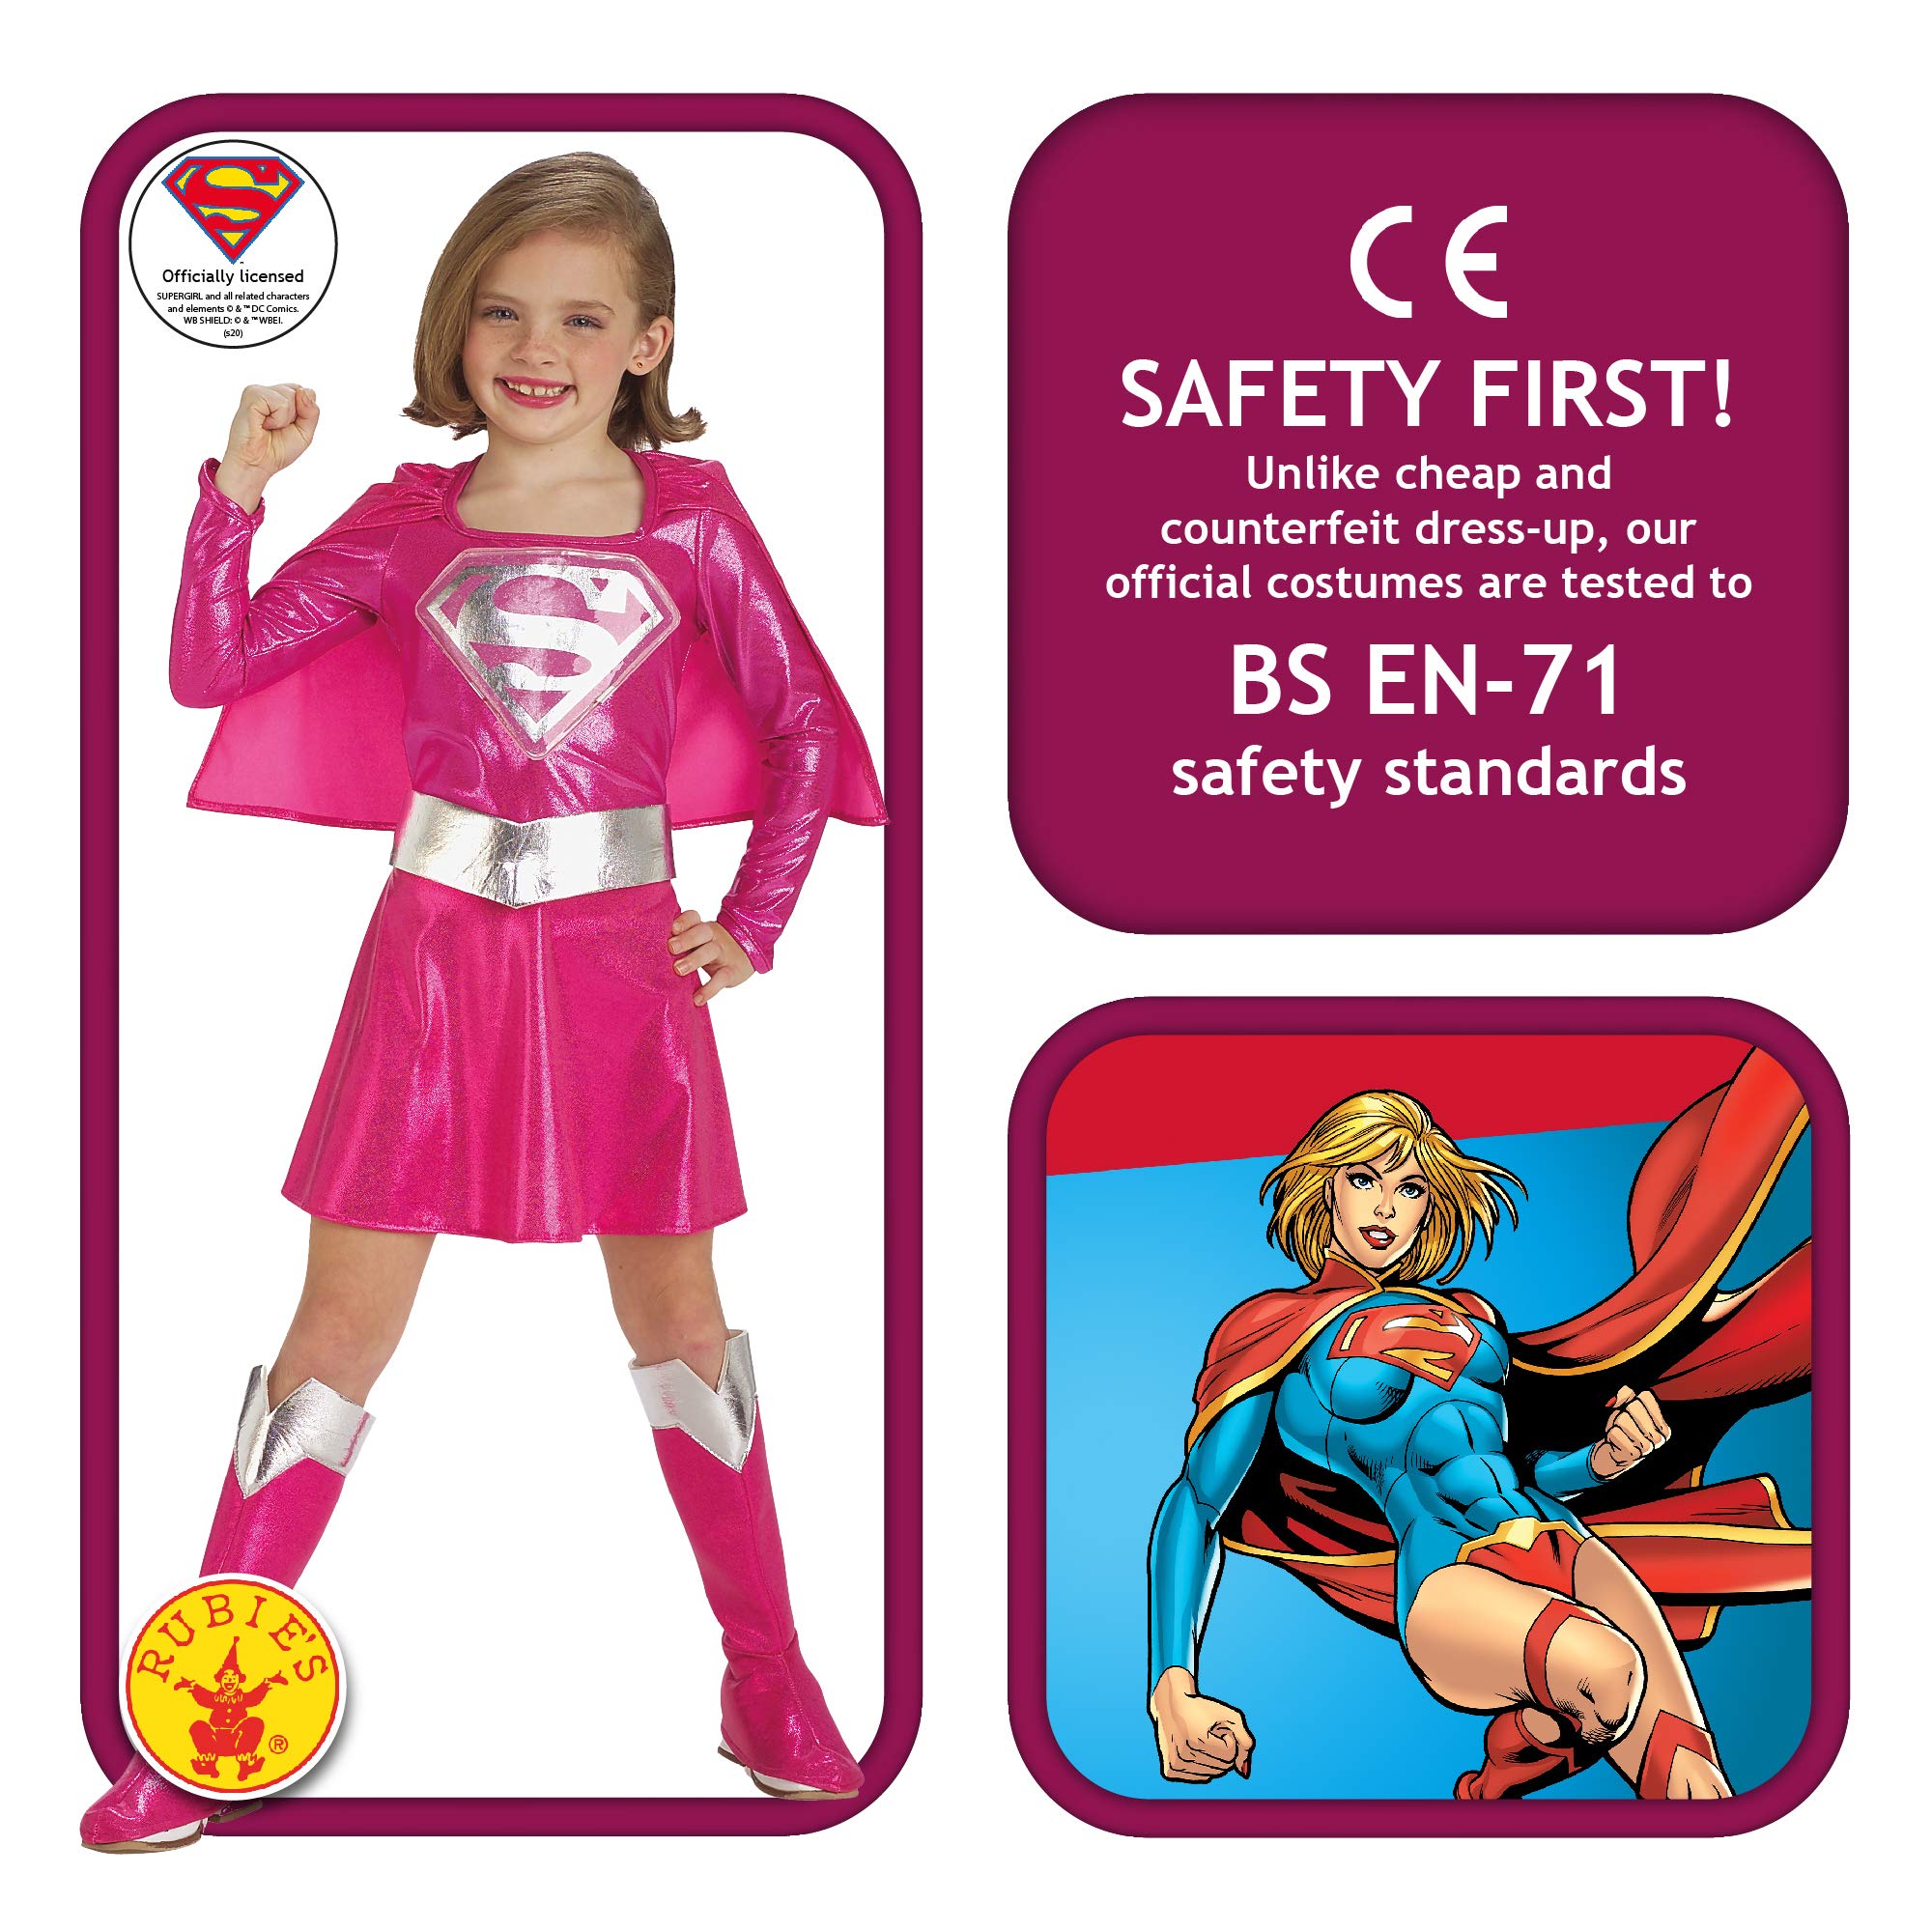 Rubie's Child's Pink Supergirl Child's Costume, Small, Pink/silver